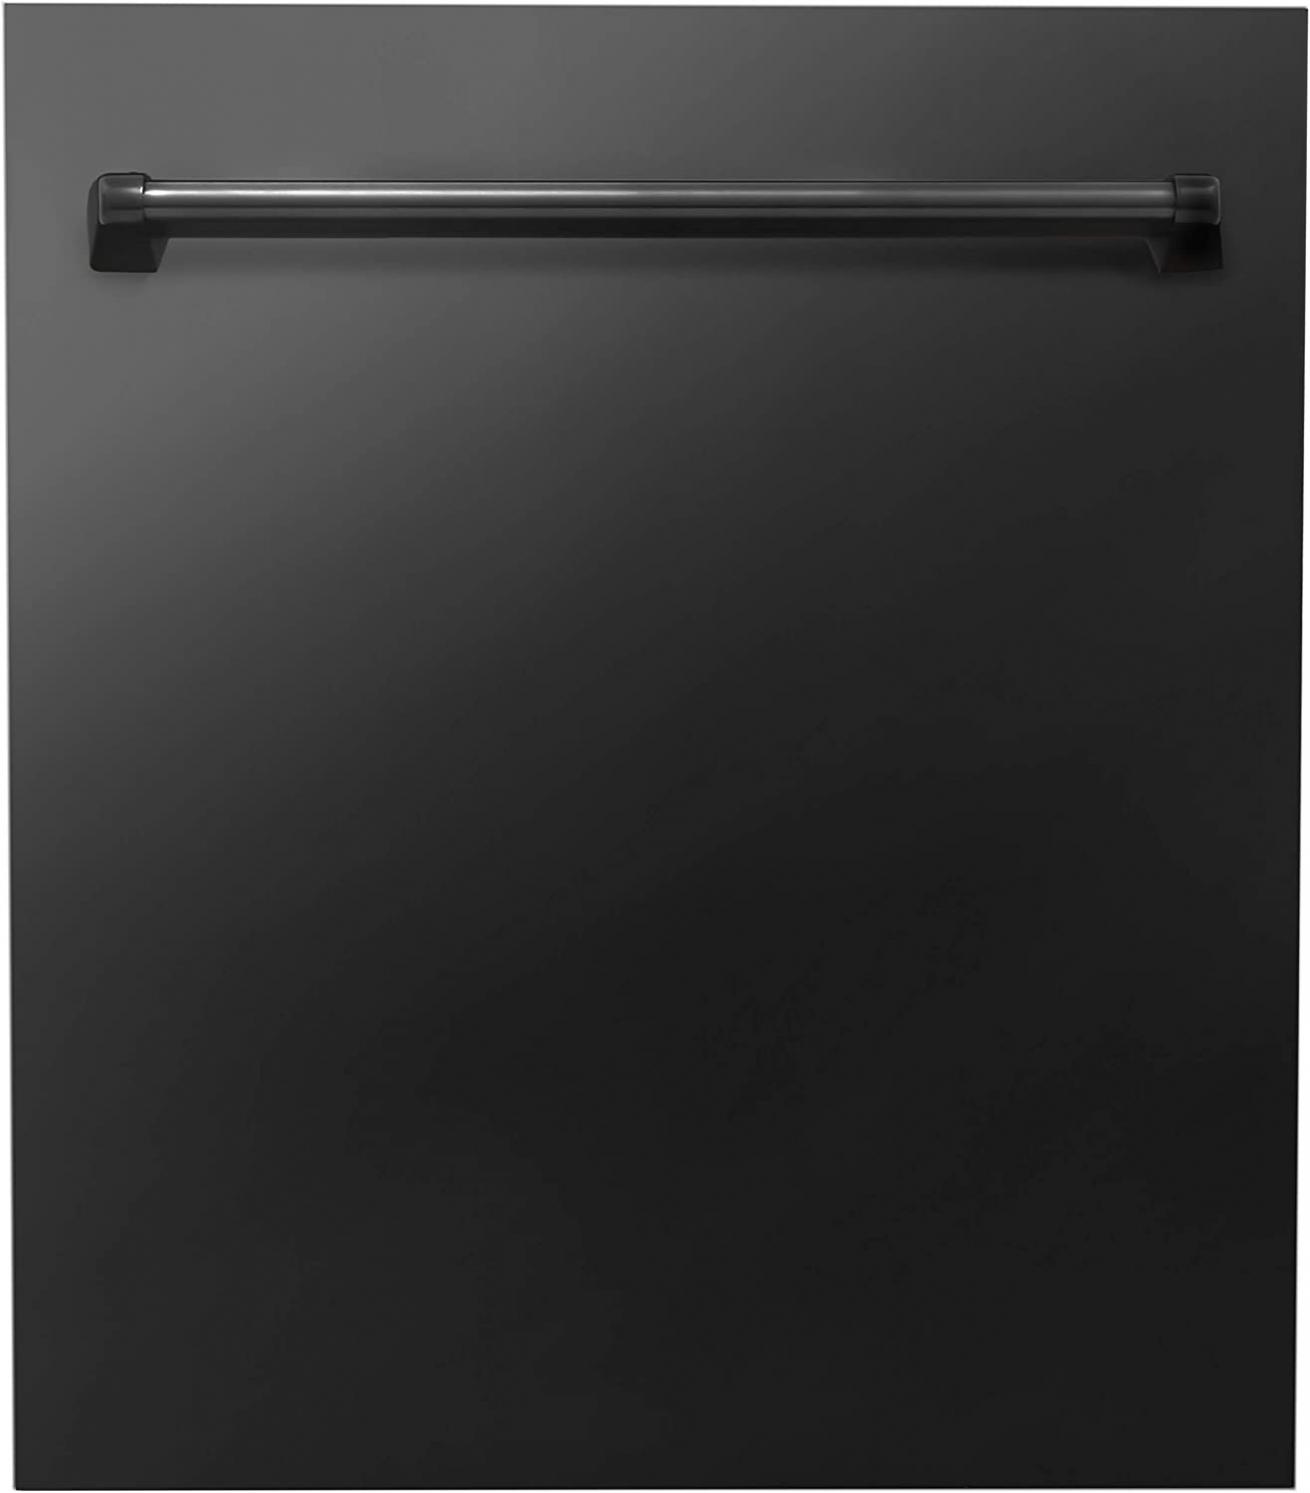 ZLINE 24 in. Top Control Dishwasher in Black Stainless Steel 120-Volt with Stainless Steel Tub and Traditional Style Handle